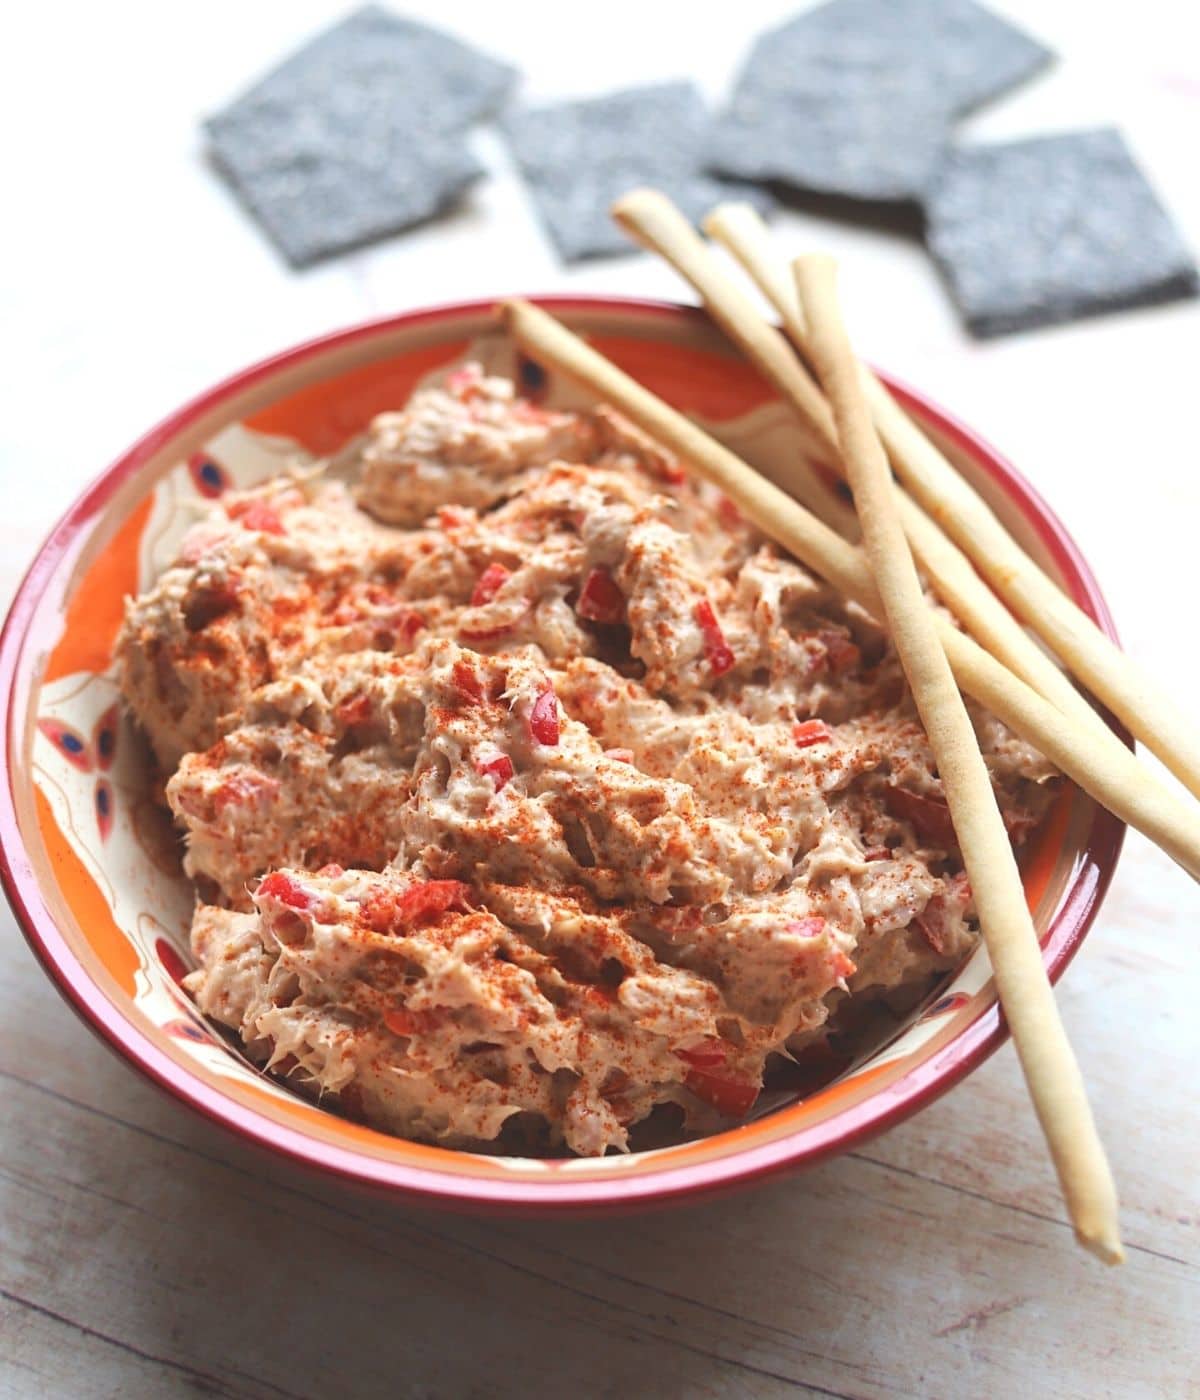 Tuna mix in a bowl with breadsticks and crackers.